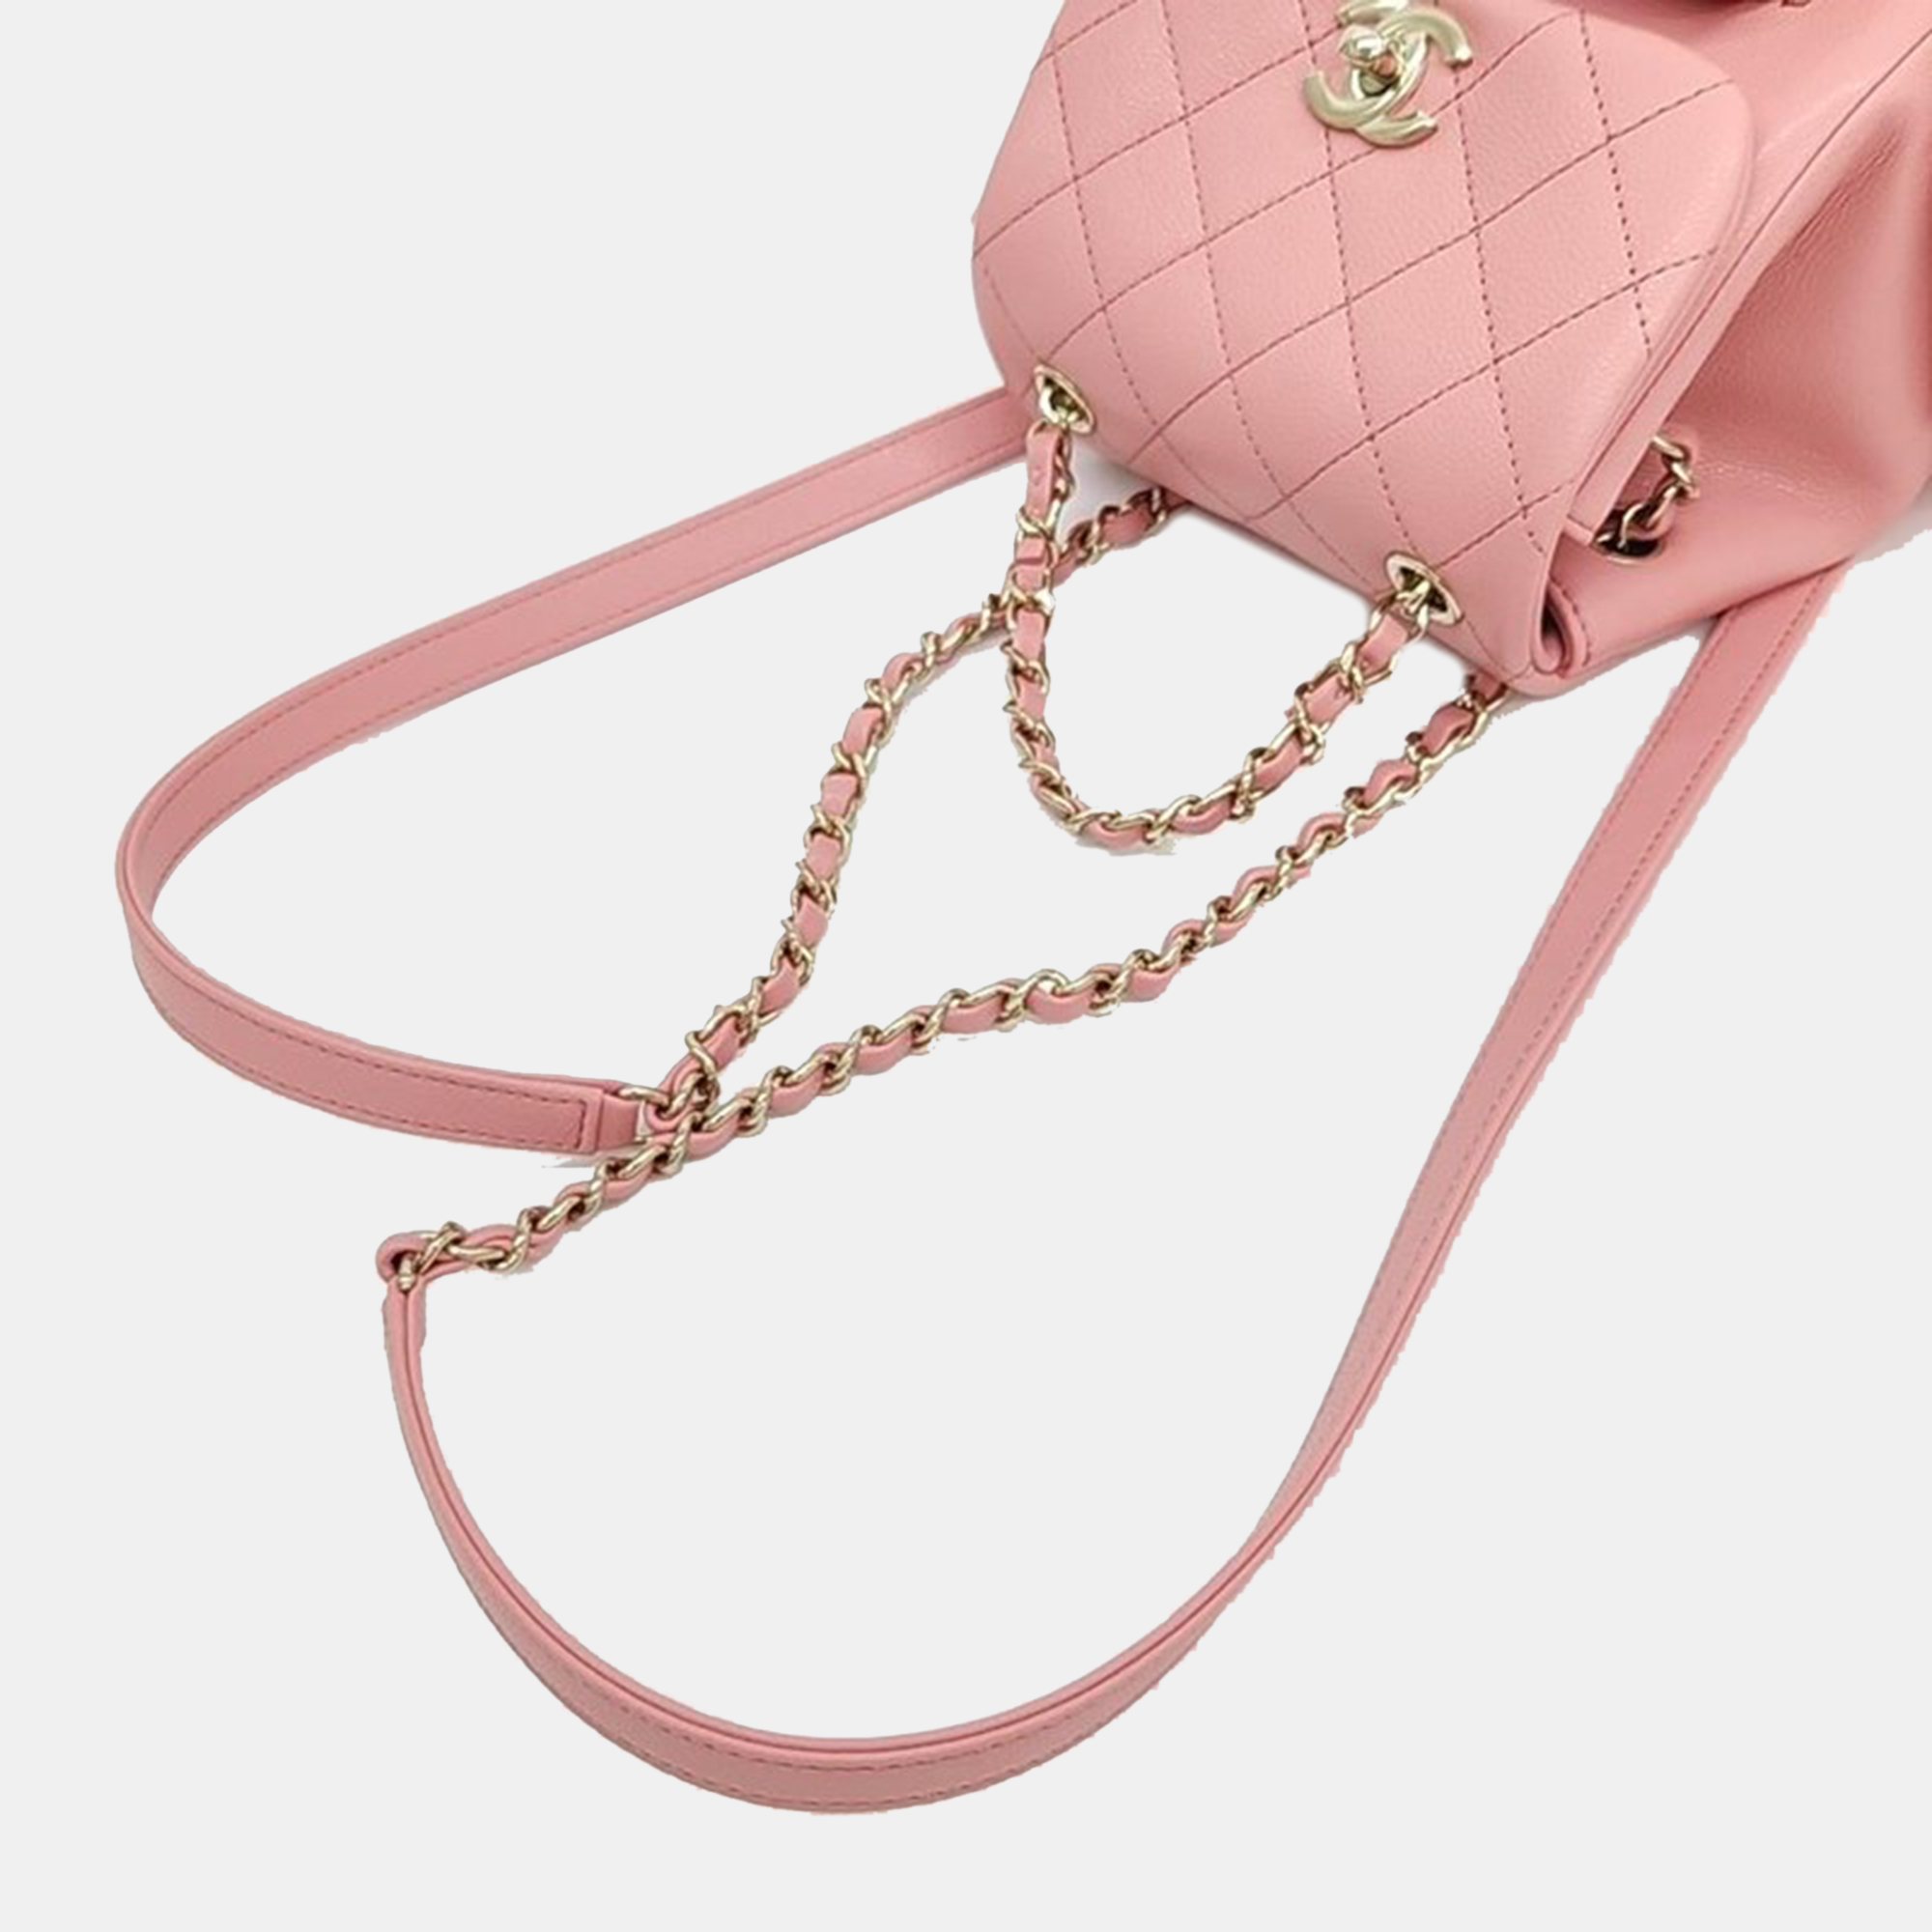 Chanel Caviar Pink Backpack